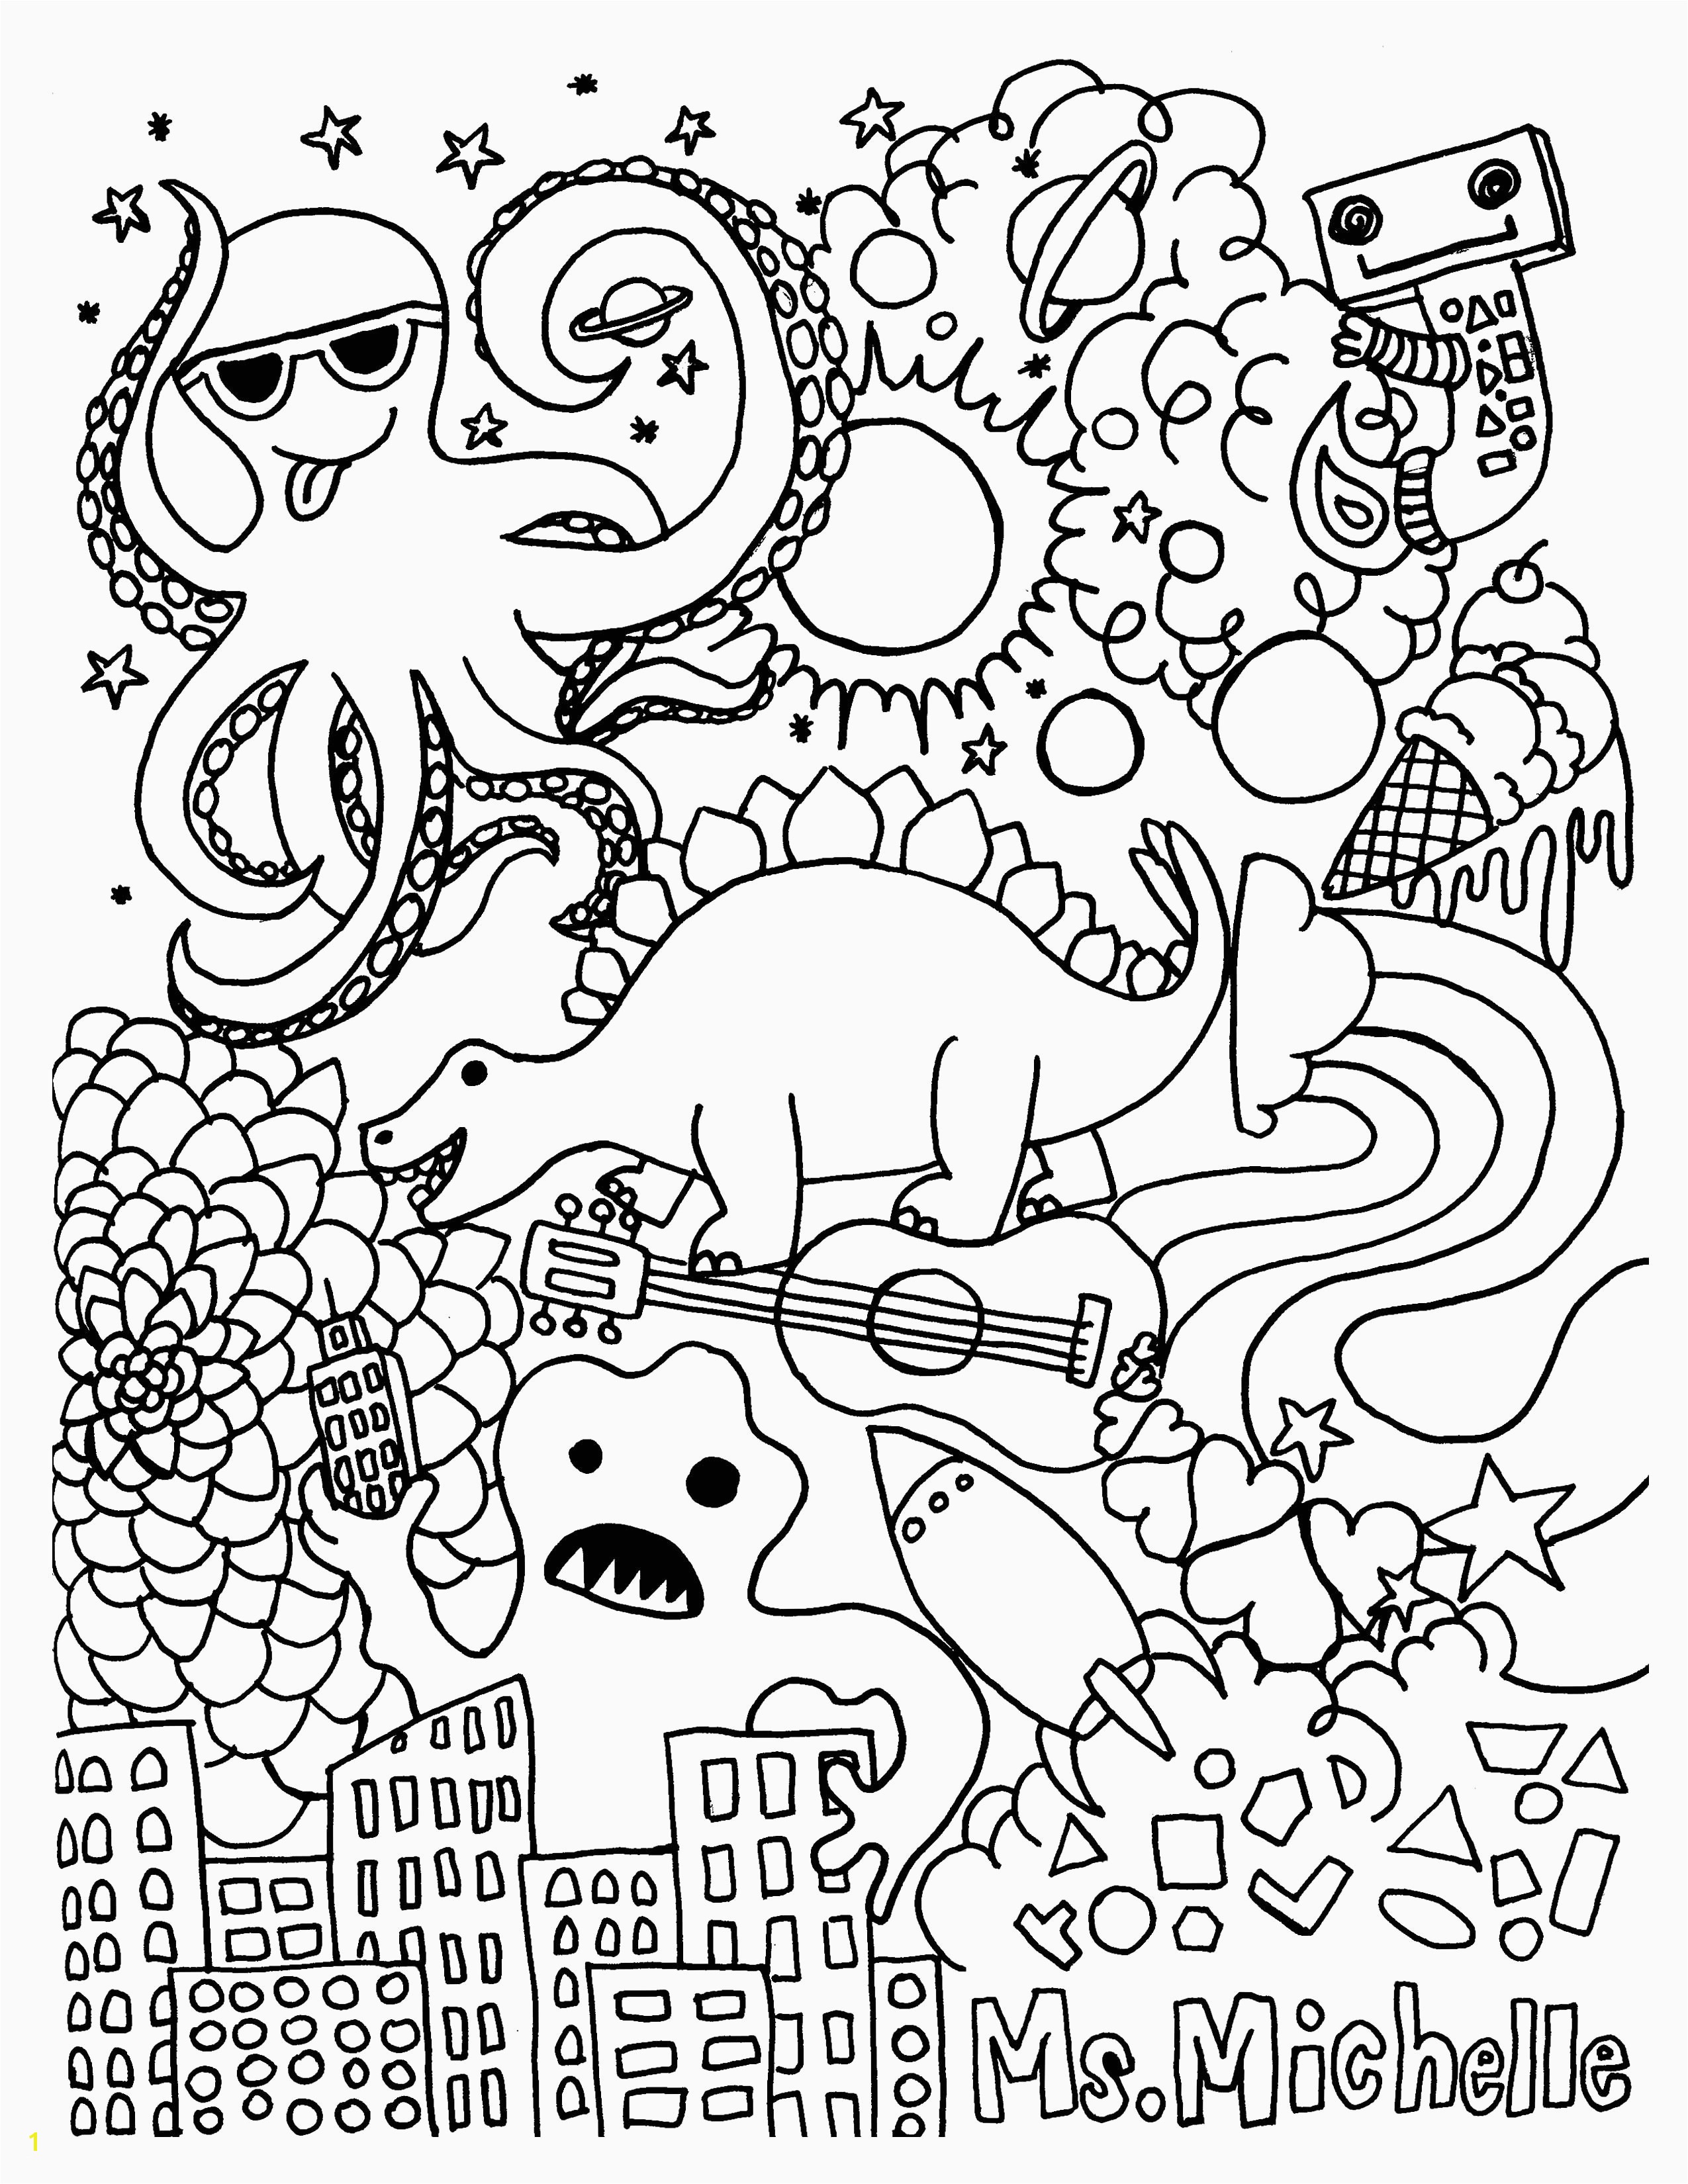 Plant Coloring Pages for Preschoolers Awesome Preschoolers Coloring Pages Heathermarxgallery Plant Coloring Pages for Preschoolers